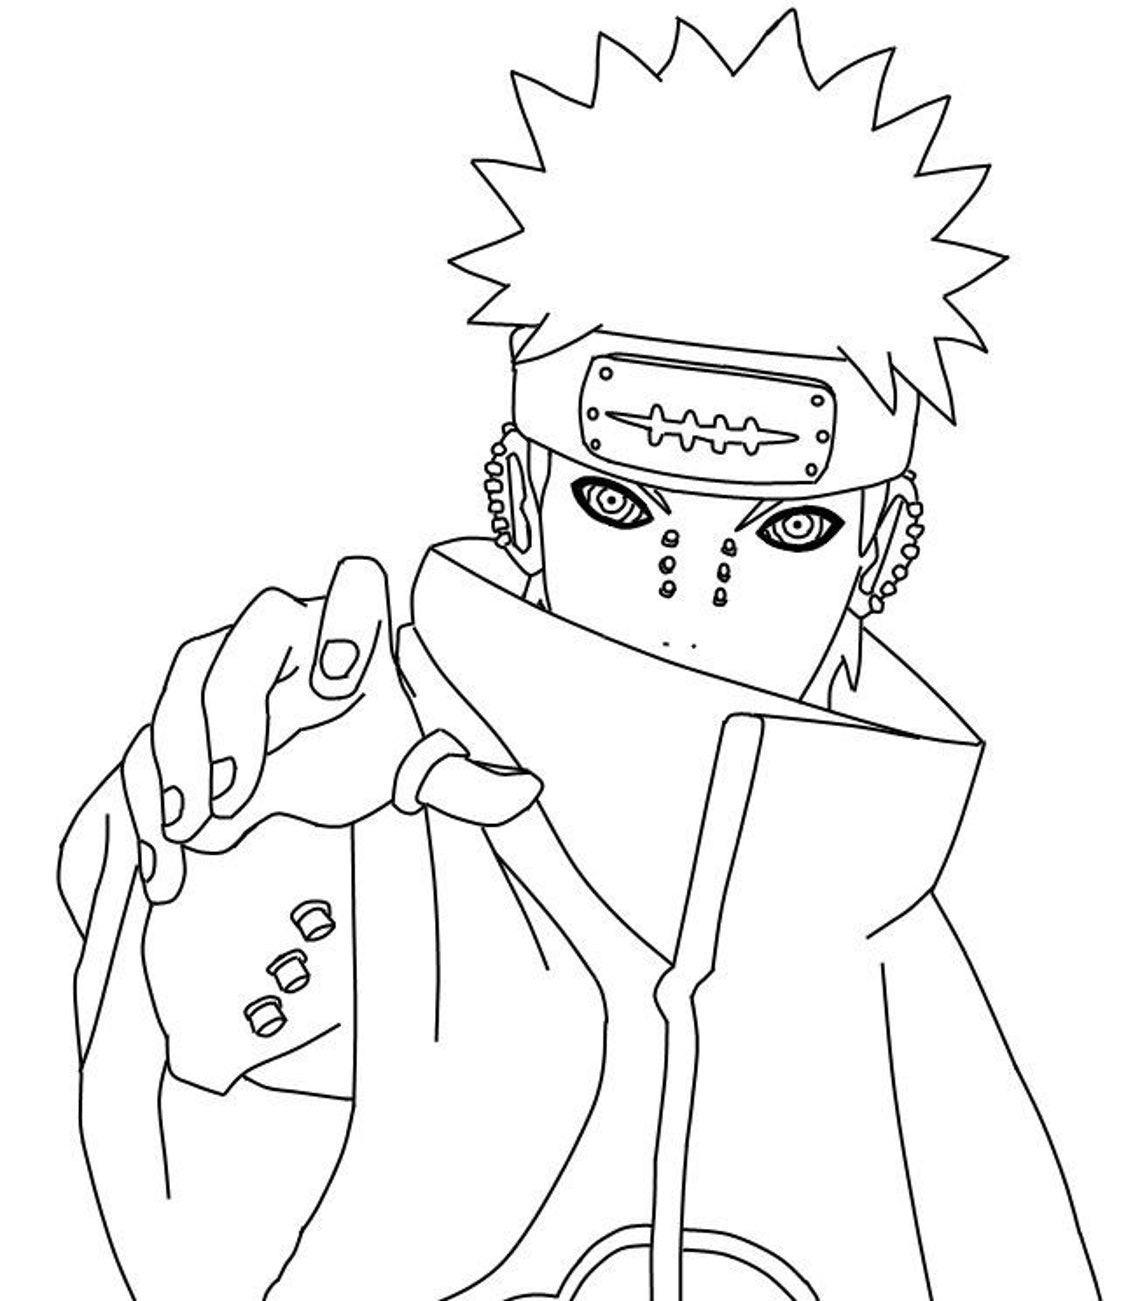 20 Printable Naruto Colouring Pages | Etsy